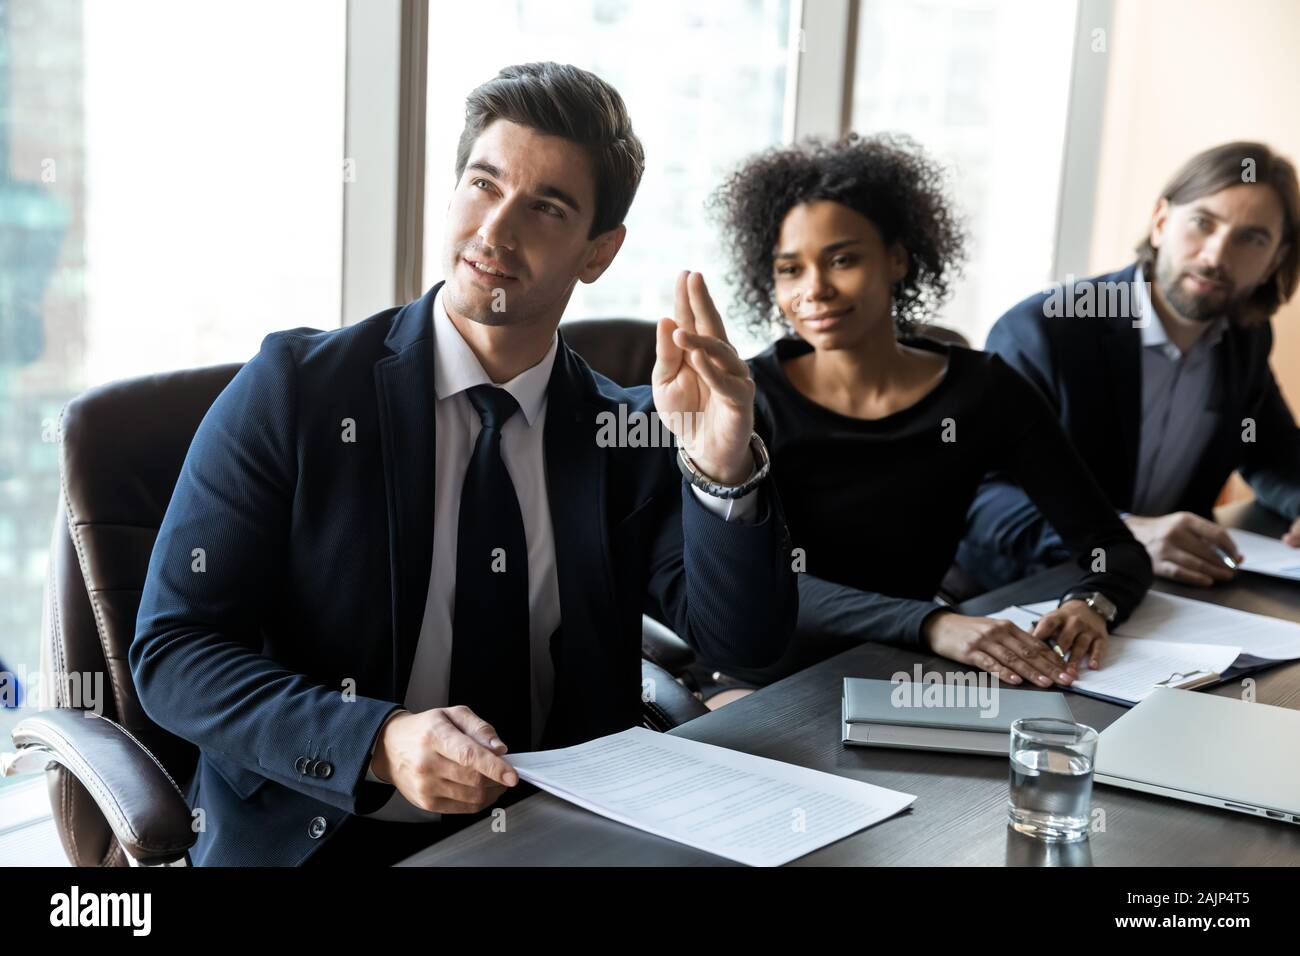 Motivated male employee raise hand participate in team discussion Stock Photo